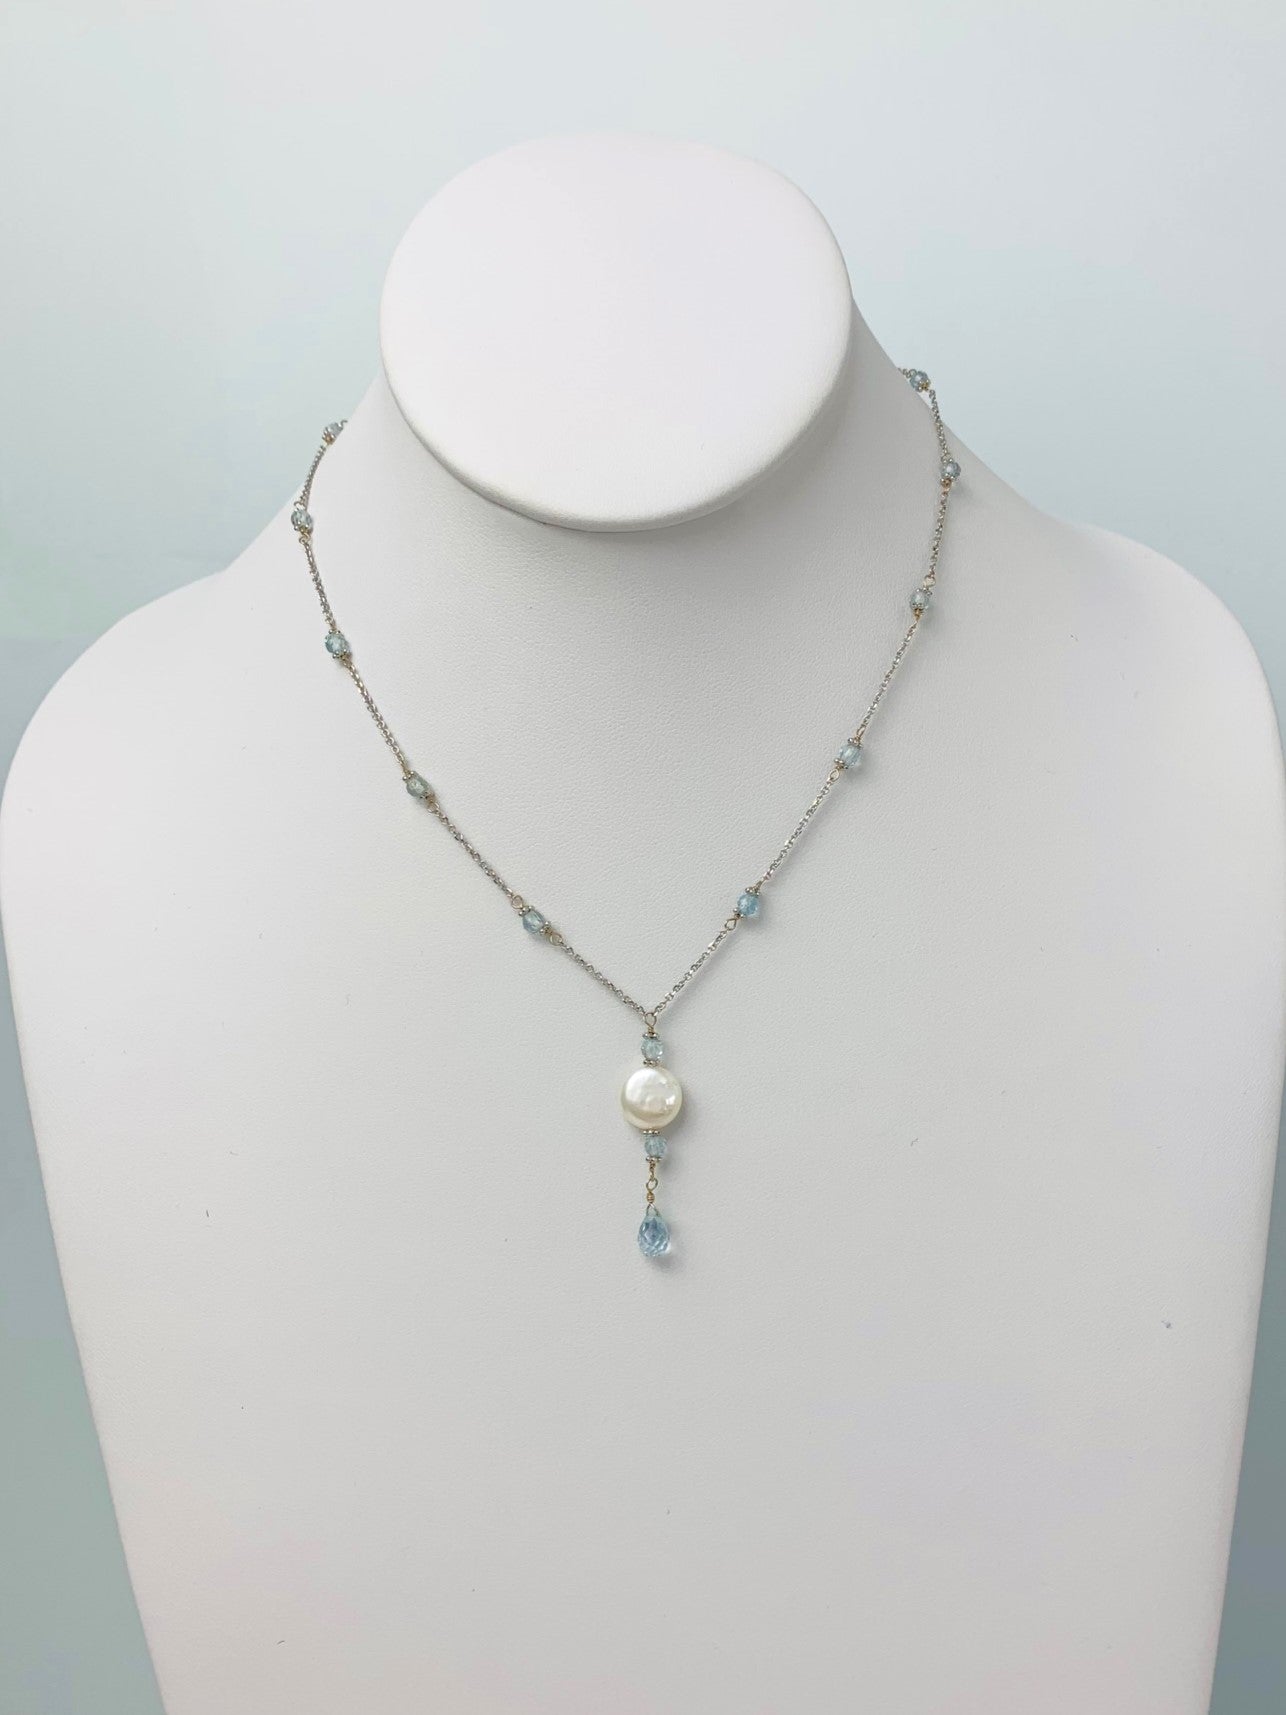 15"-16 Blue Topaz And Pearl Station Necklace With Center Drop in 14KW - NCK-490-DRPPRLGM14W-WHBT-16